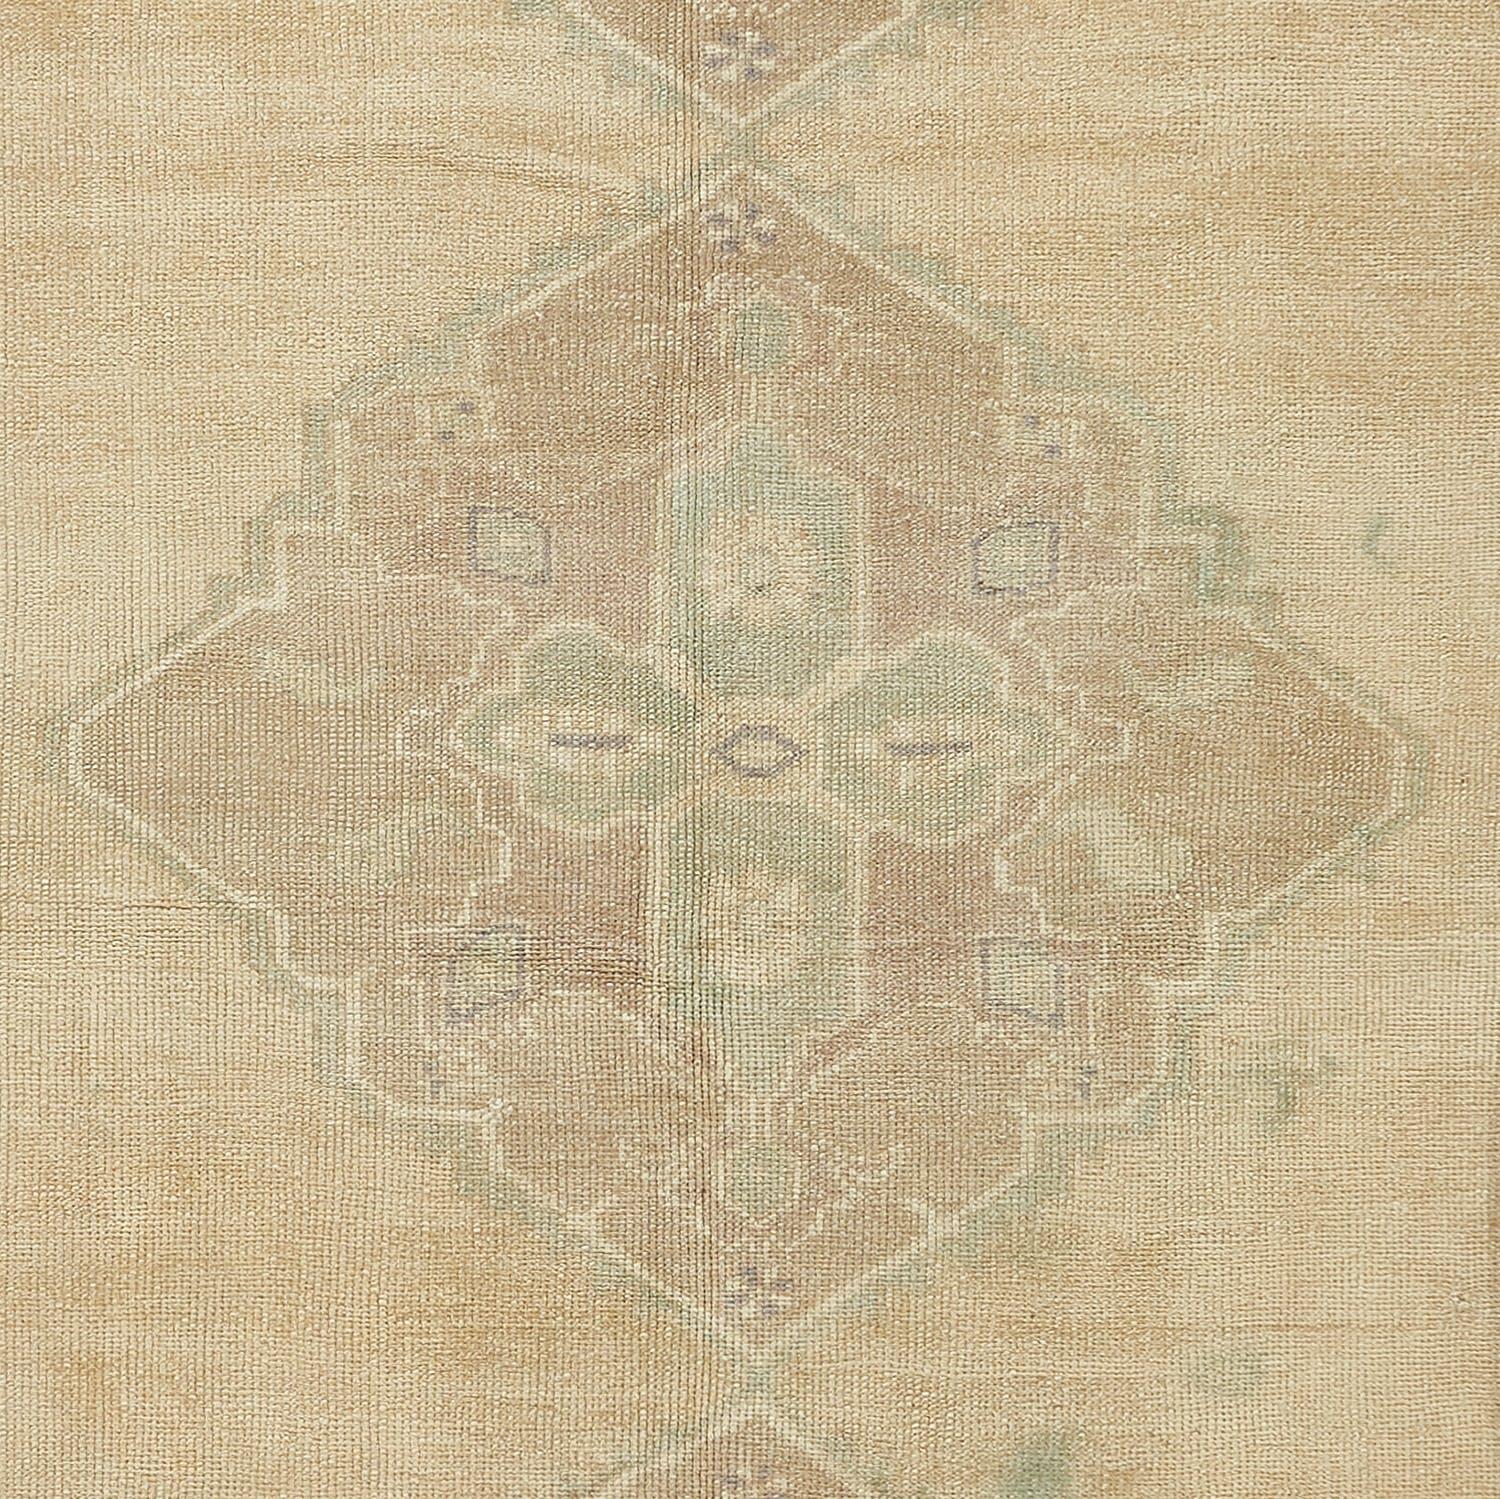 This vintage wool rug from Turkey is sun-faded and sheared, revealing faint traces of ornate traditional motifs through soft pigments. Light touches and a time-worn patina elevate this Turkish wool rug from our Fresco collection, as hints of the